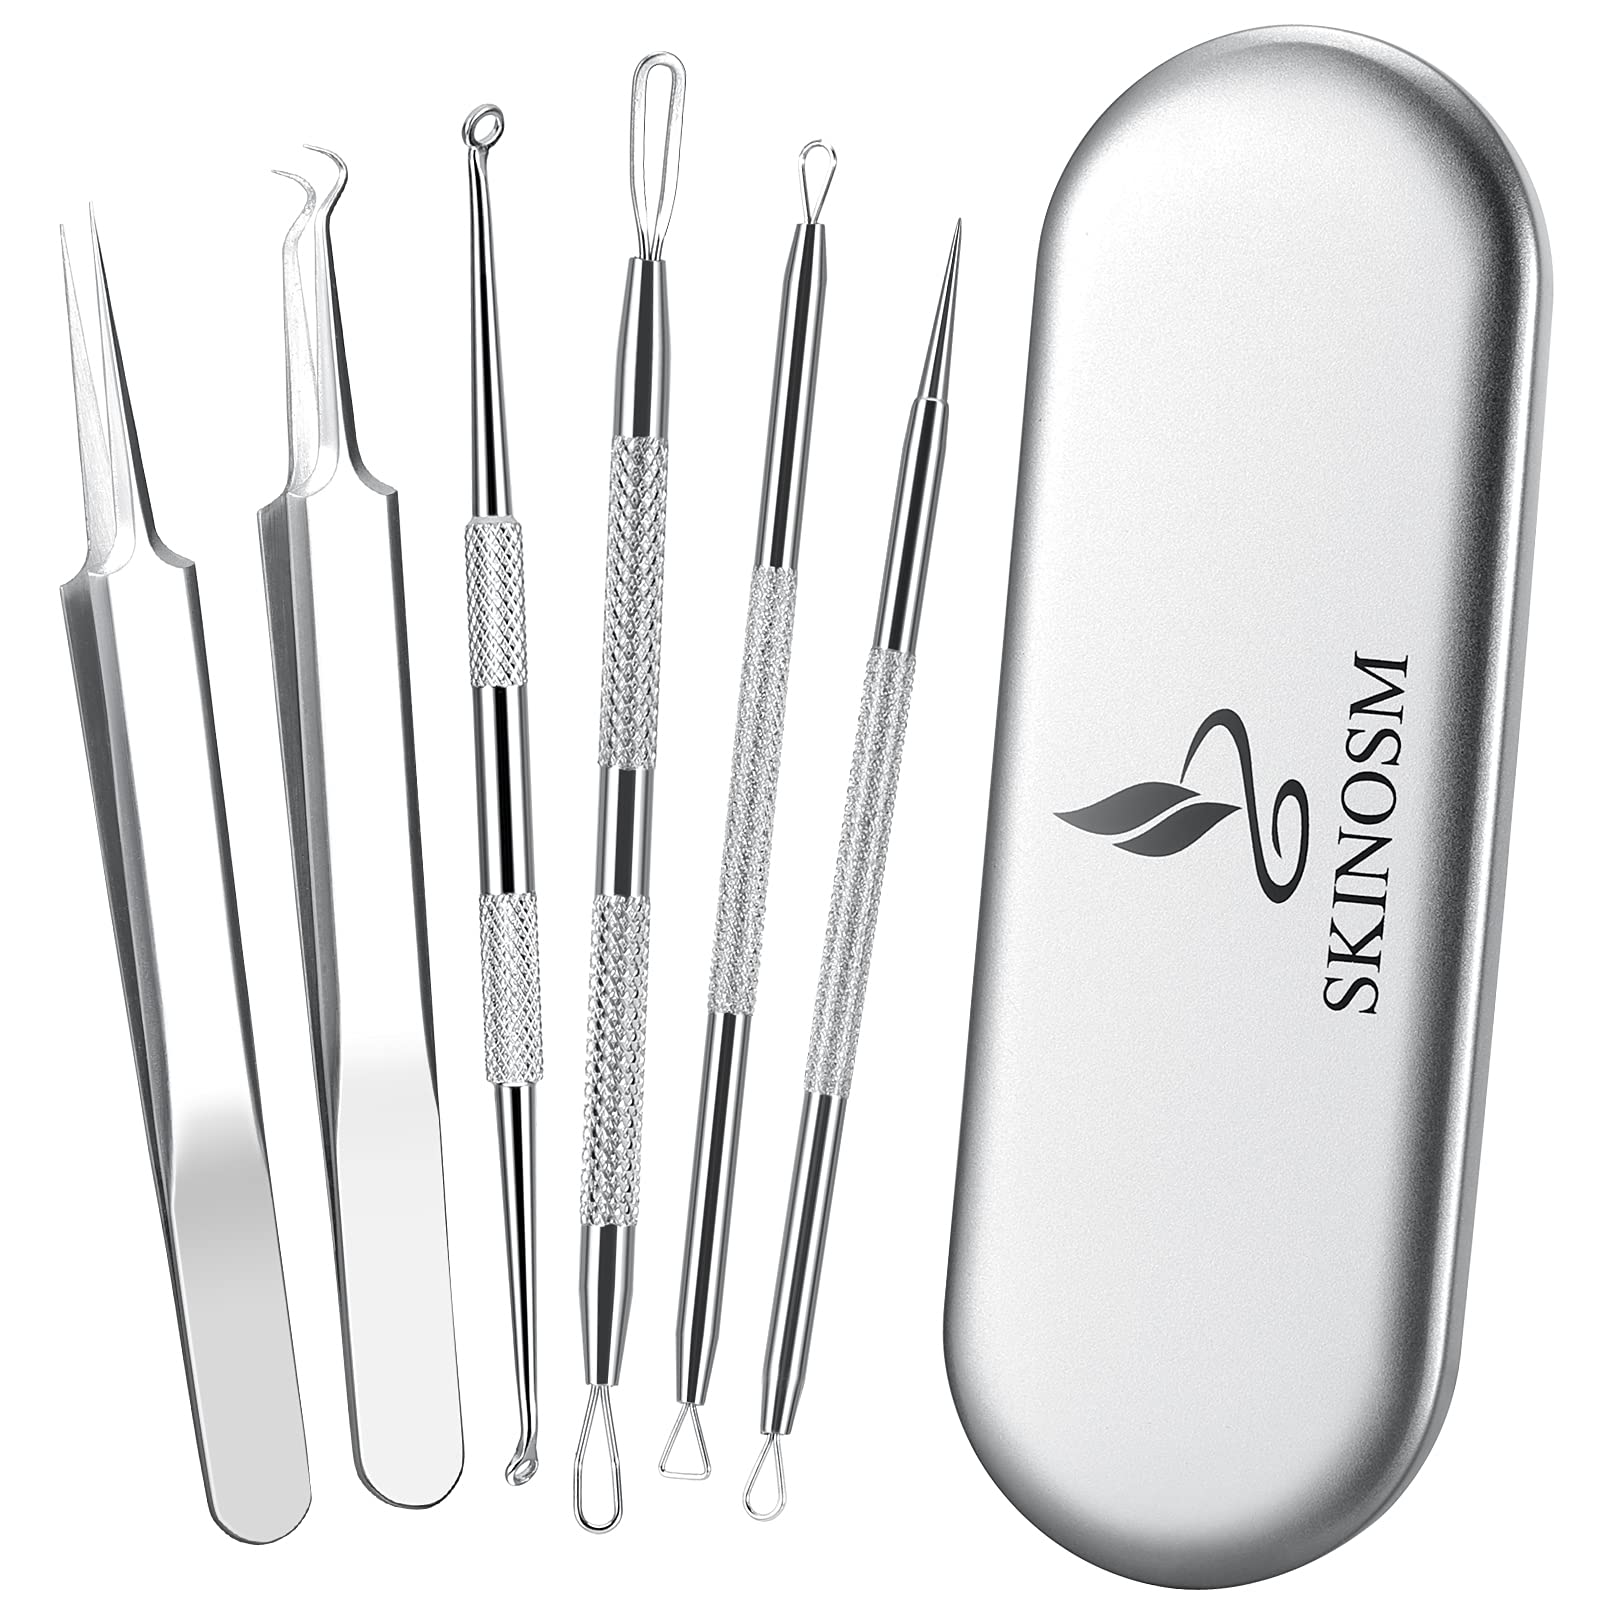 Blackhead Remover Pimple Popper Tool Kit 6-in-1 Blackhead Comedone Acne  Blemish Pimple Extractor Tool